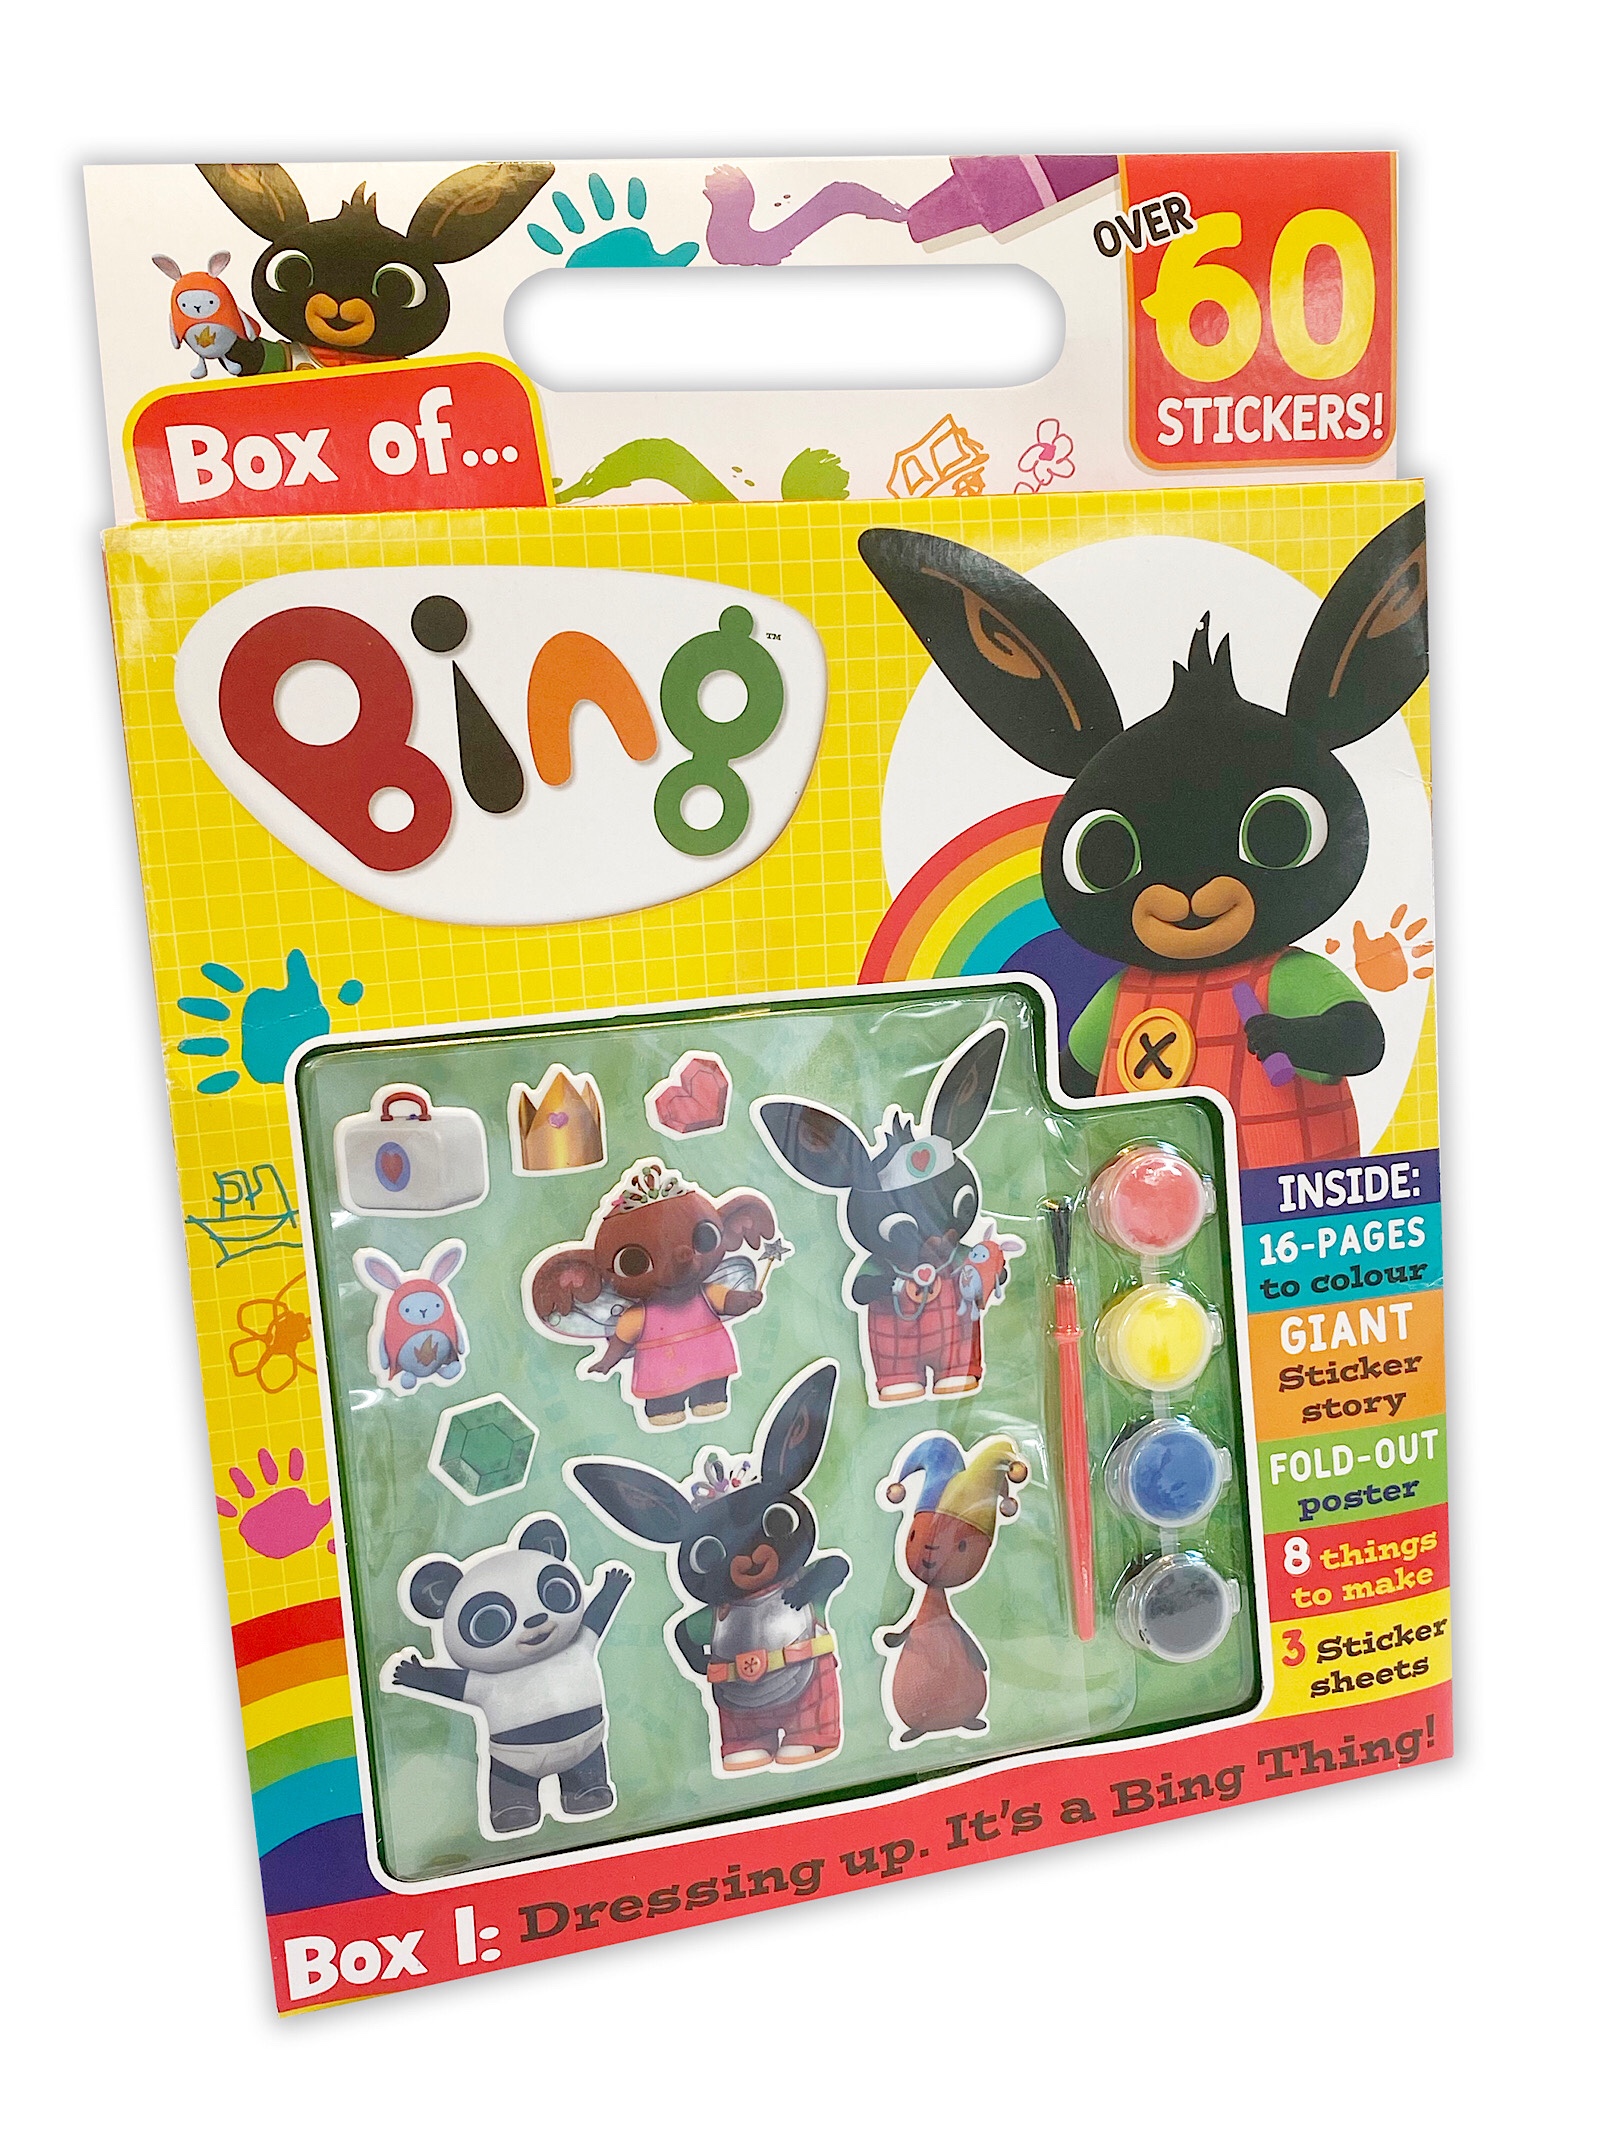 Kennedy Publishing launches “Box of… Bing”, out now –